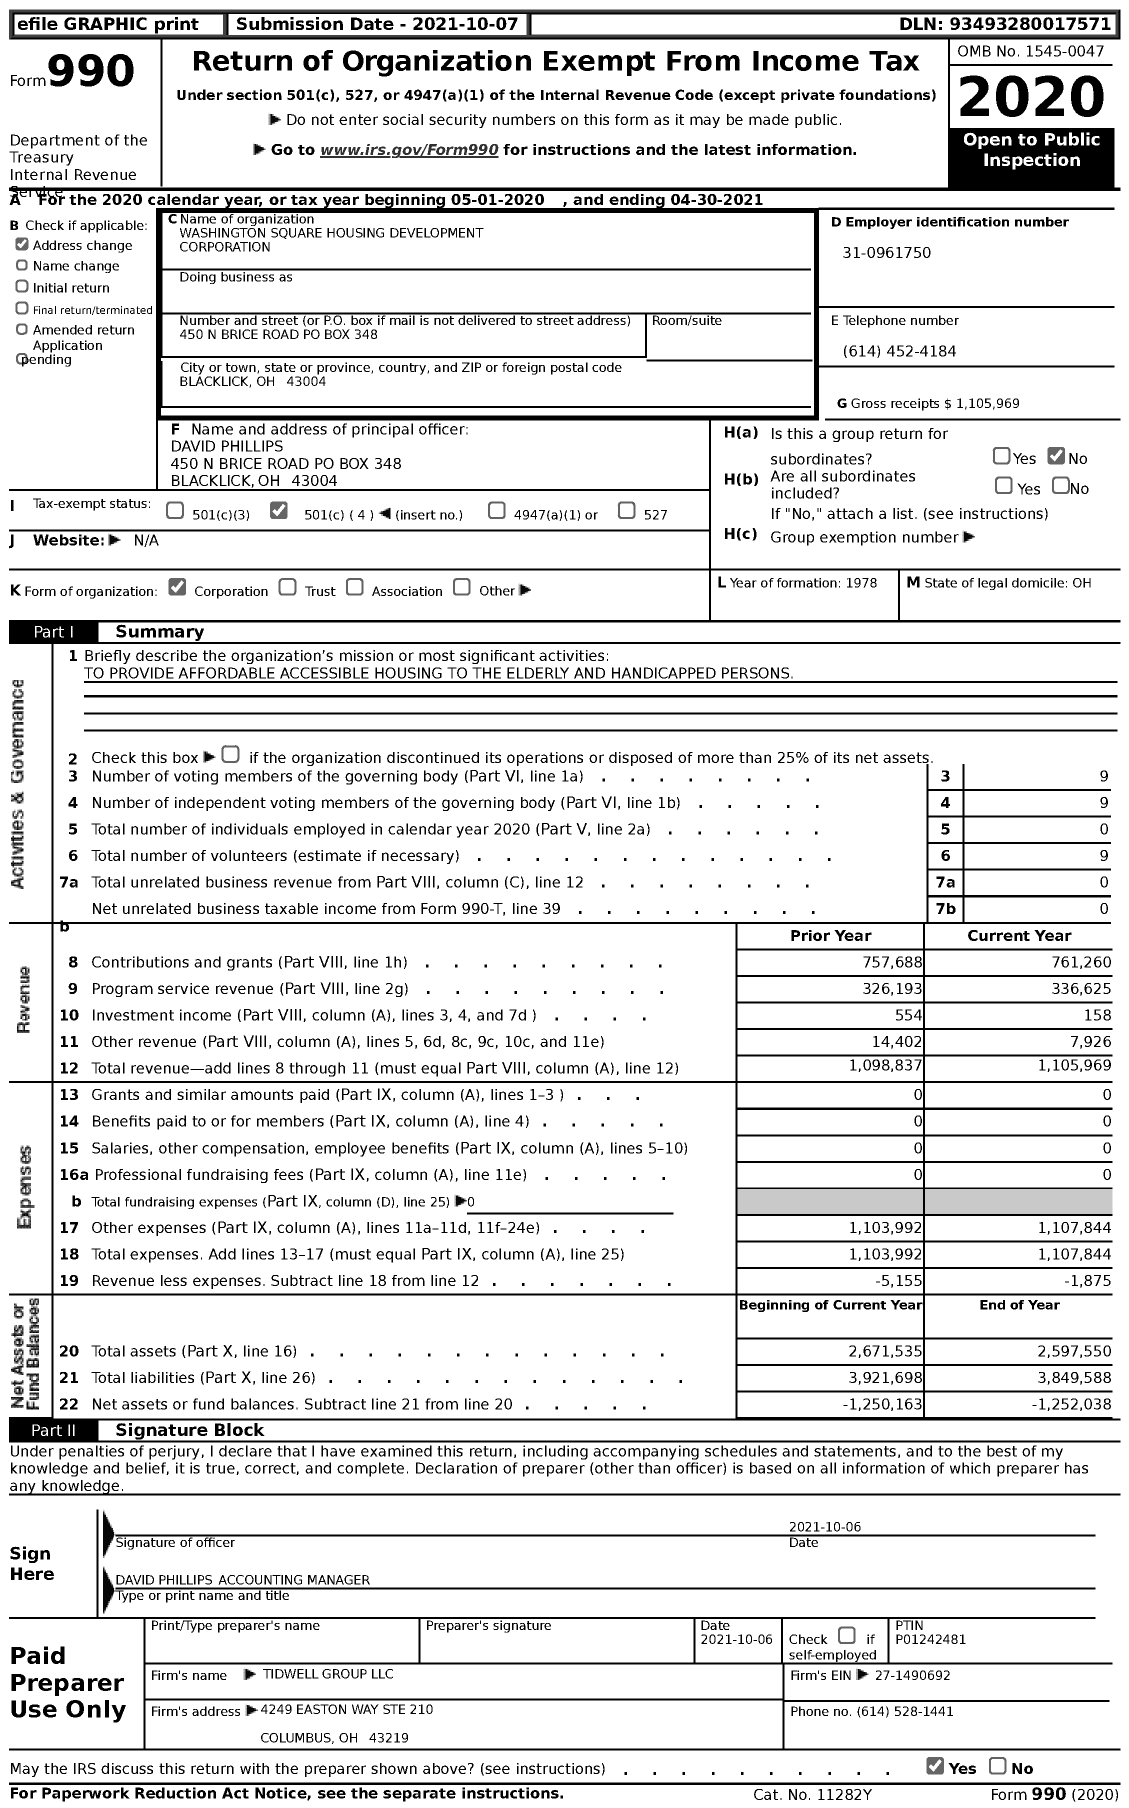 Image of first page of 2020 Form 990 for Washington Square Housing Development Corporation